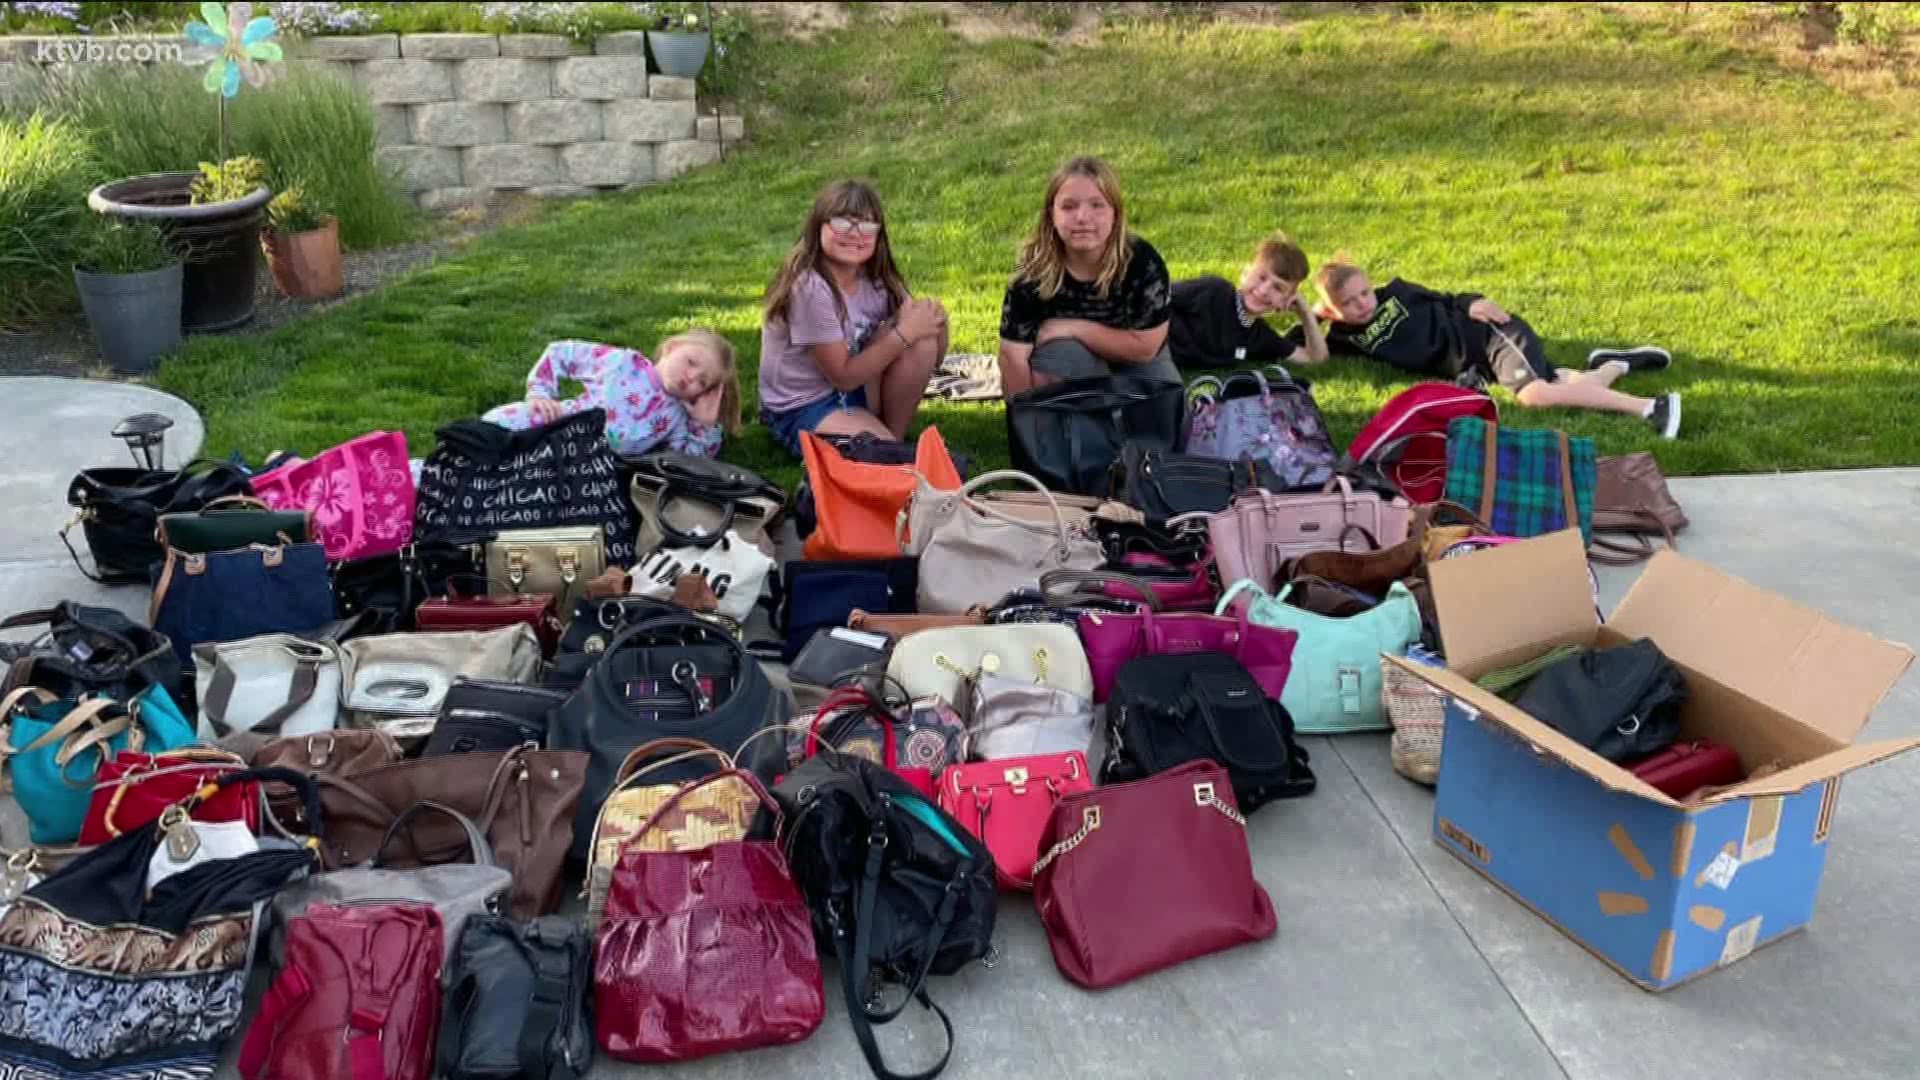 Laundry Wolverton was inspired to give back to women in need in the community, and the effort is catching on as hundreds of bags have been donated.